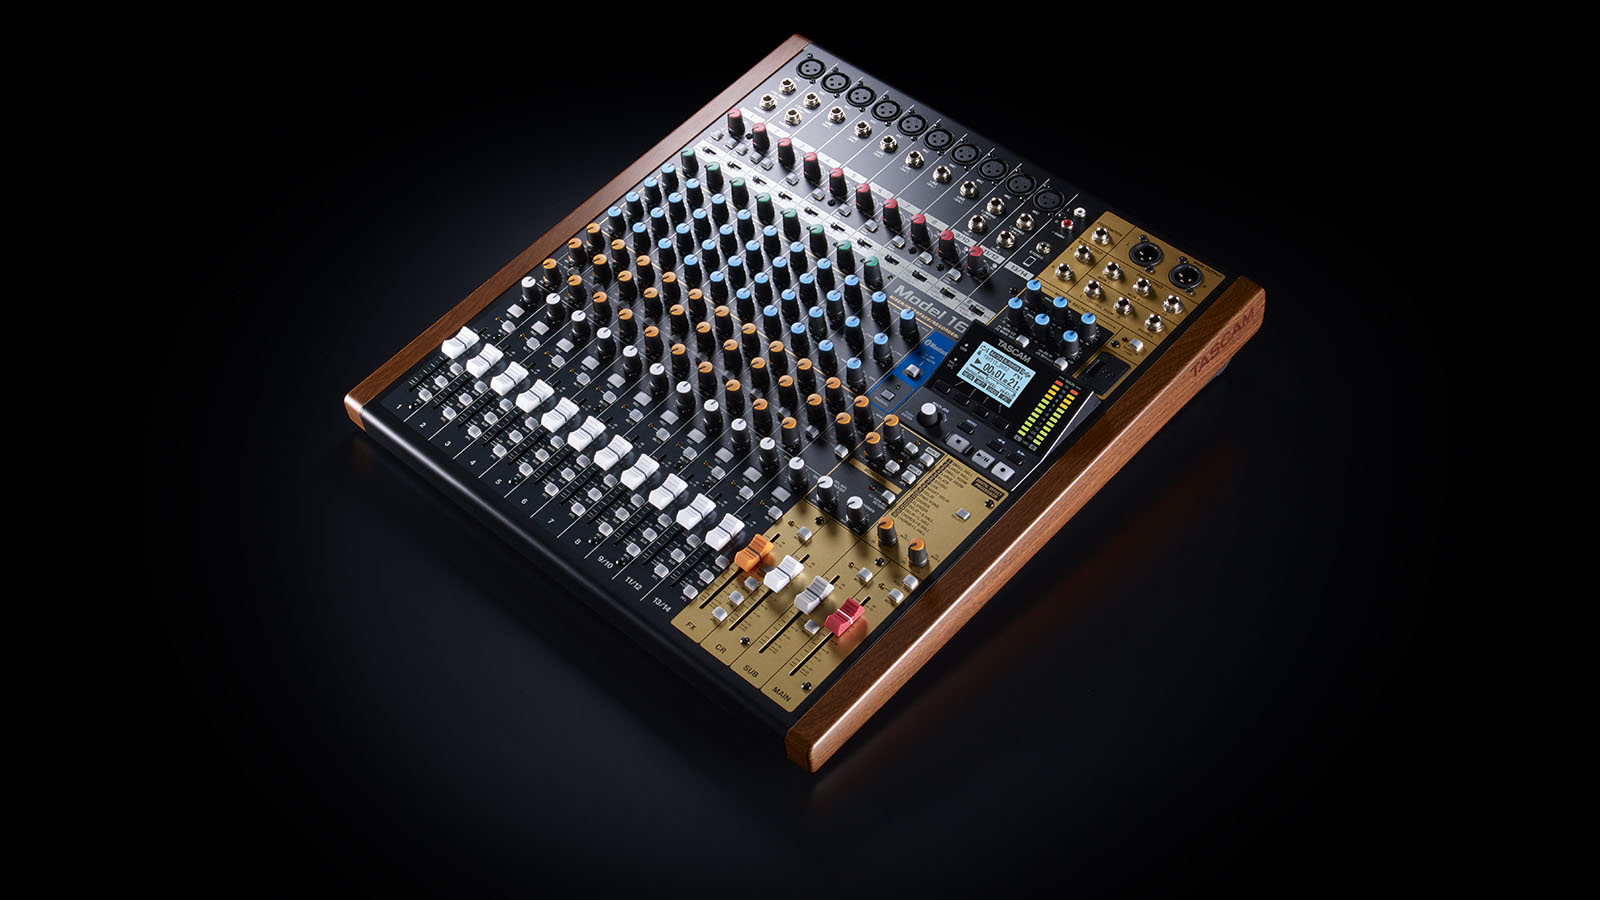 Tascam’s Model 16 combines analogue feel with digital recording